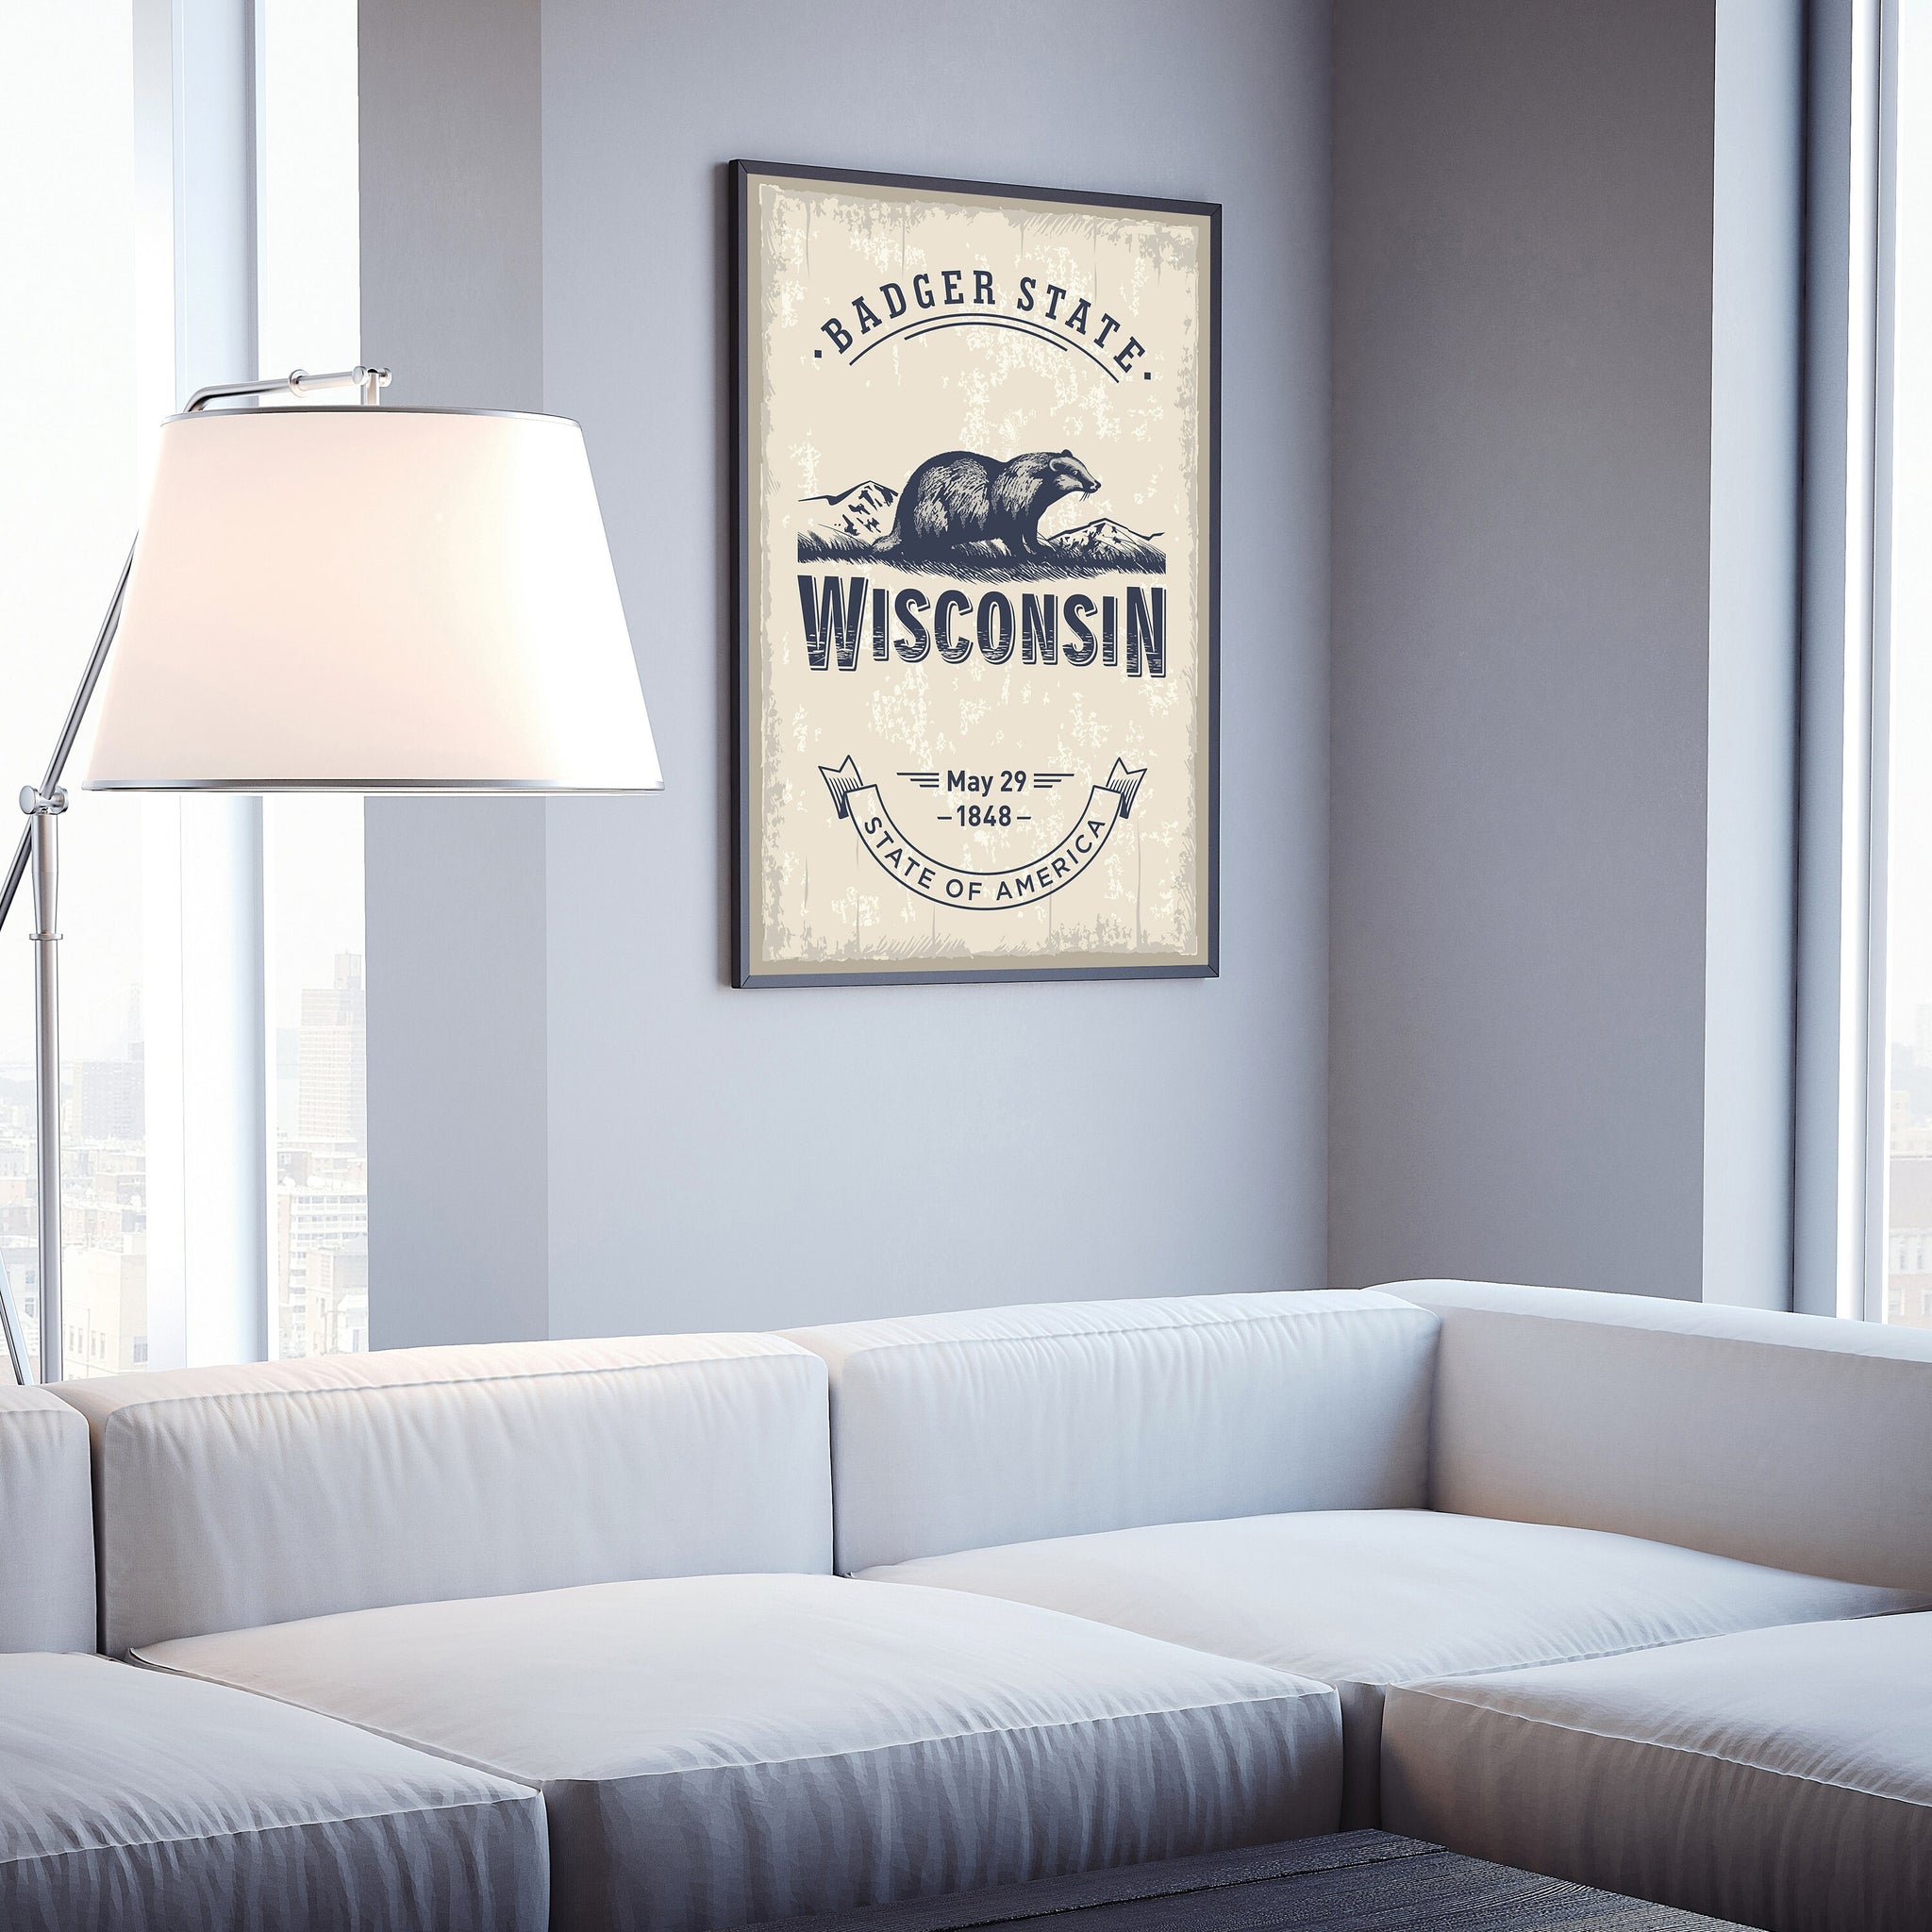 Wisconsin State Symbol Poster, Wisconsin Poster Print, Wisconsin State Emblem Poster, Retro Travel State Poster, Home and Office Wall Art